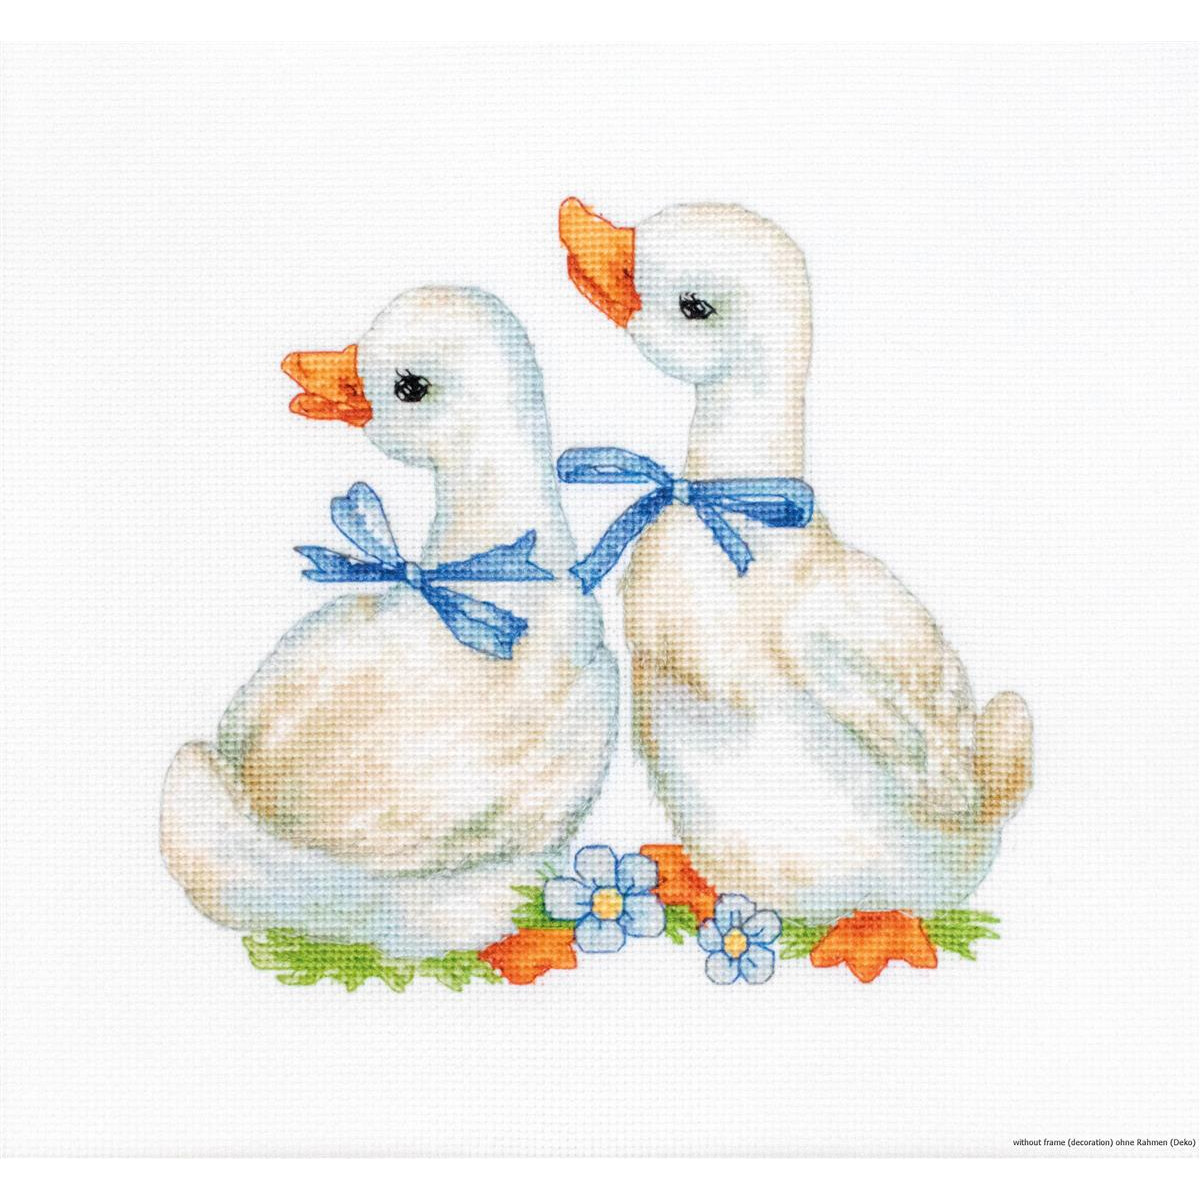 Luca-S counted Cross Stitch kit "Geese",...